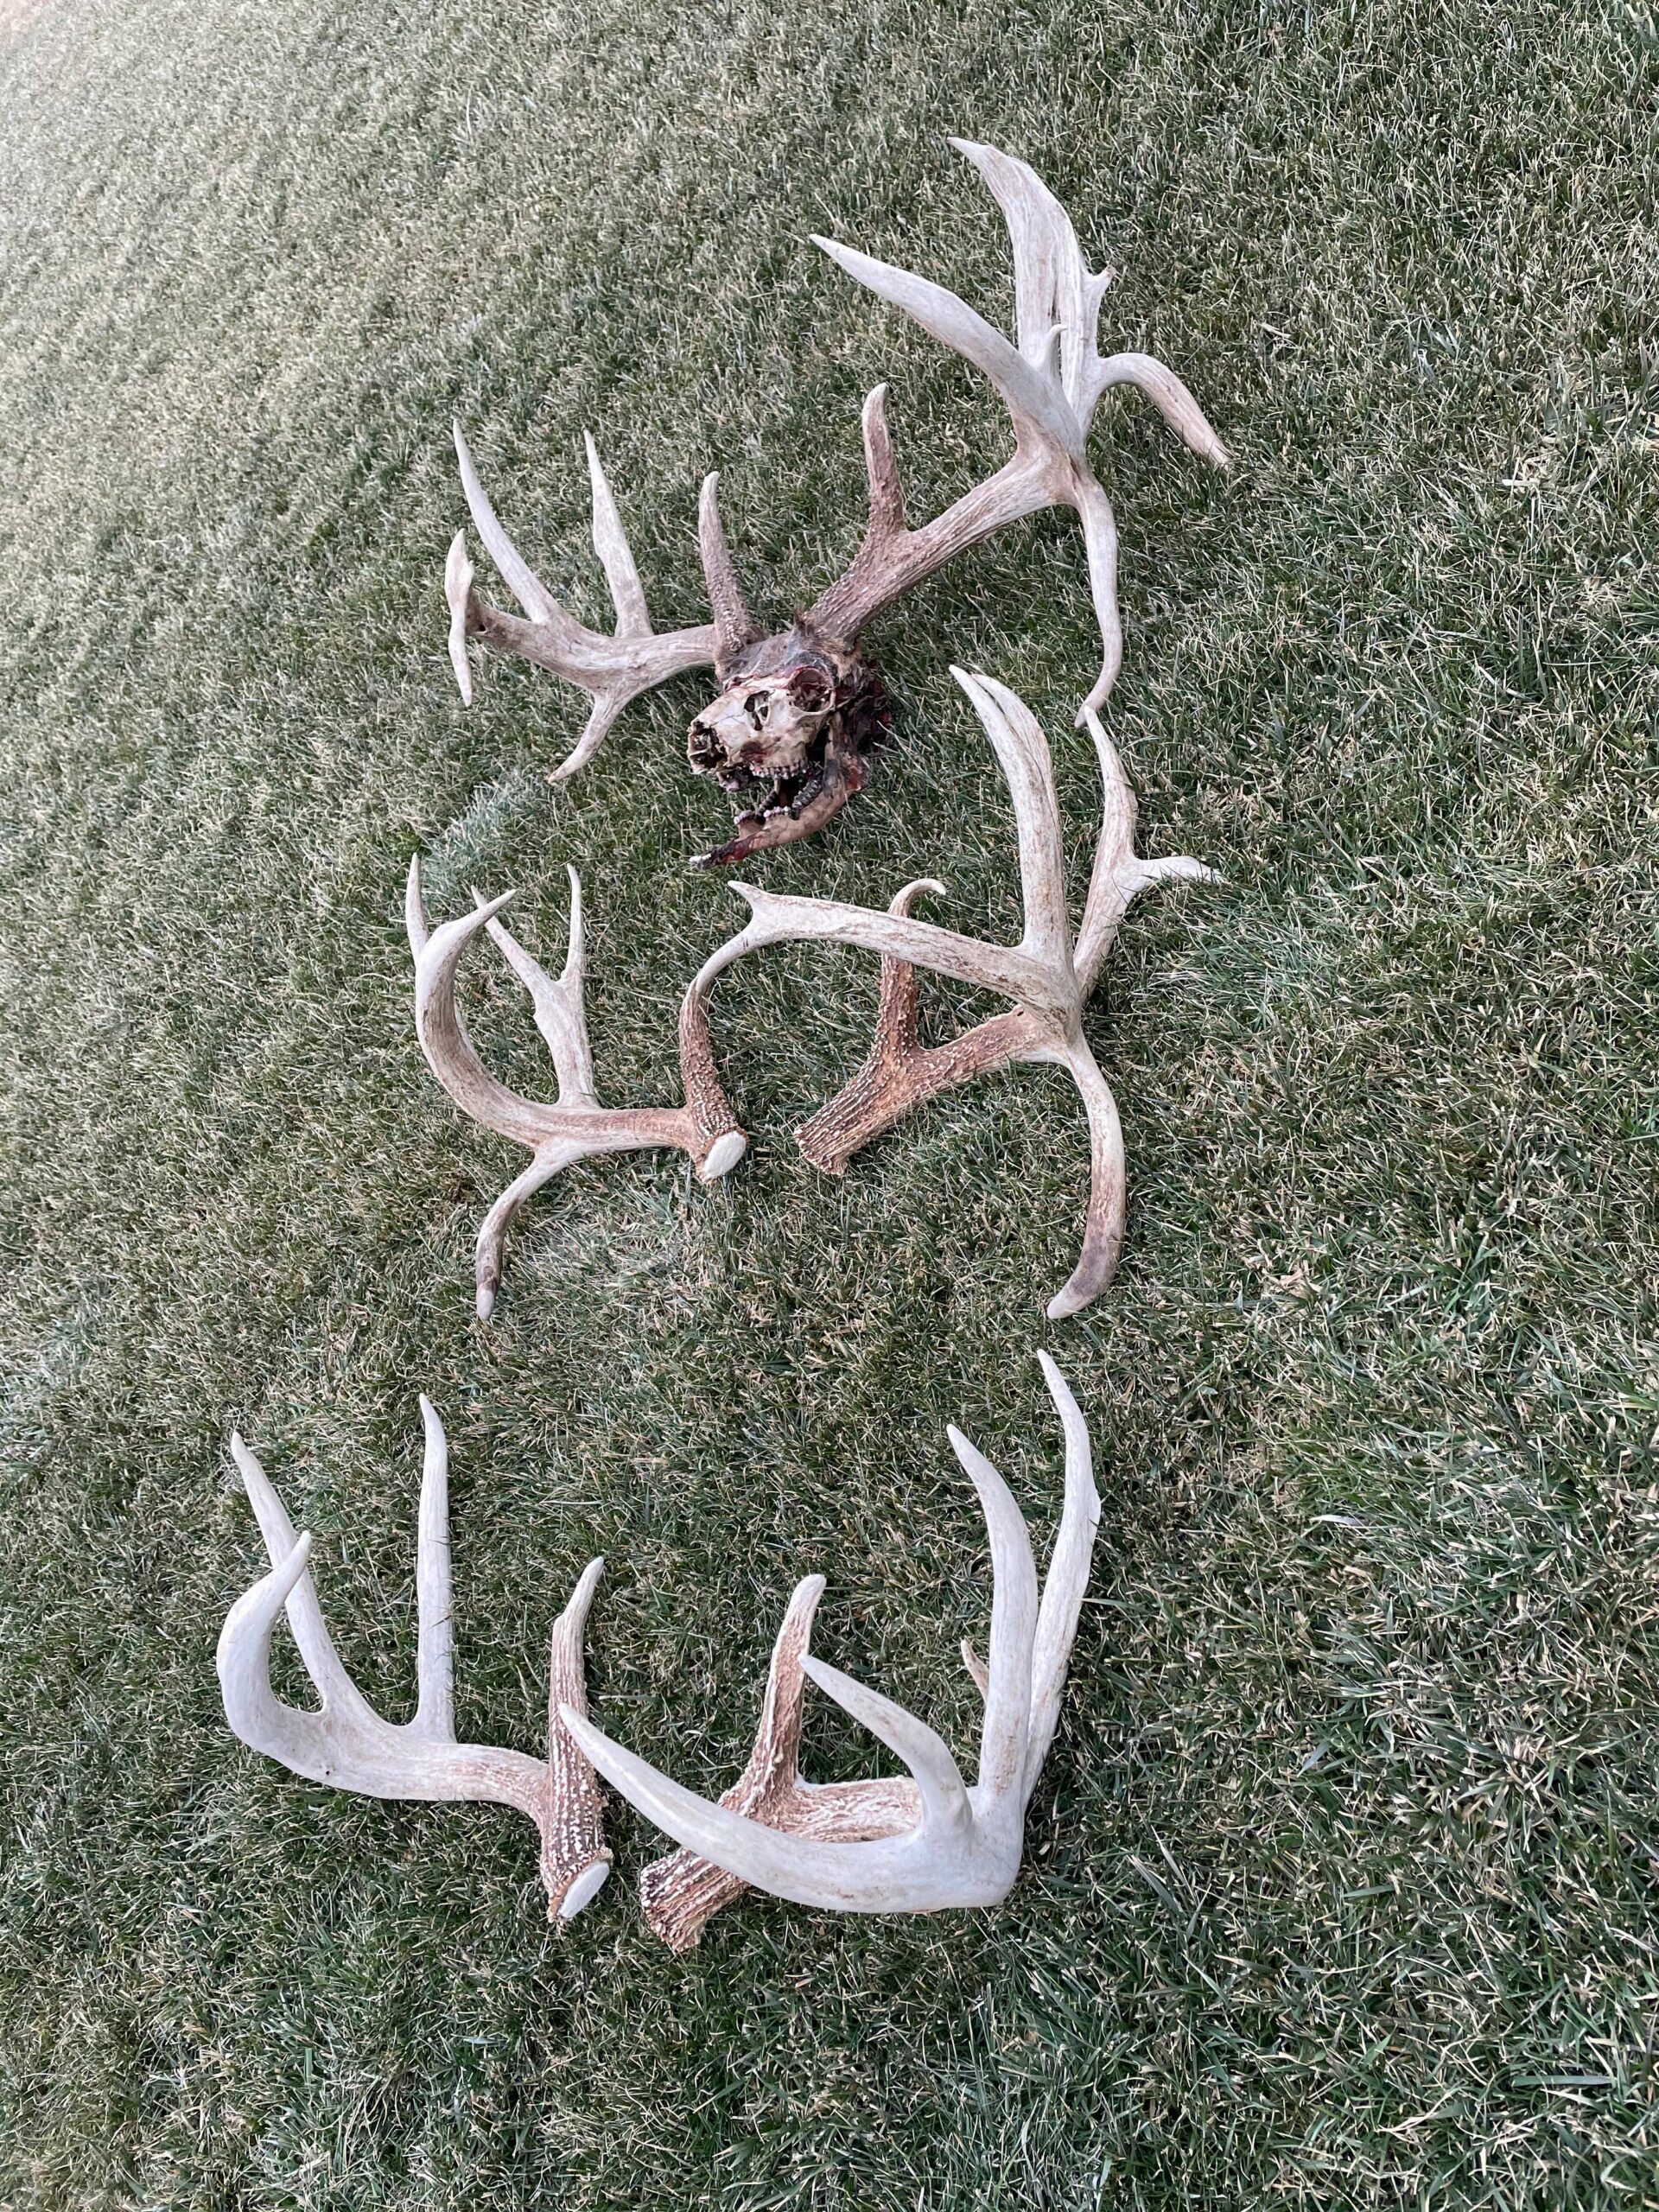 Pairs of shed antlers on the ground.